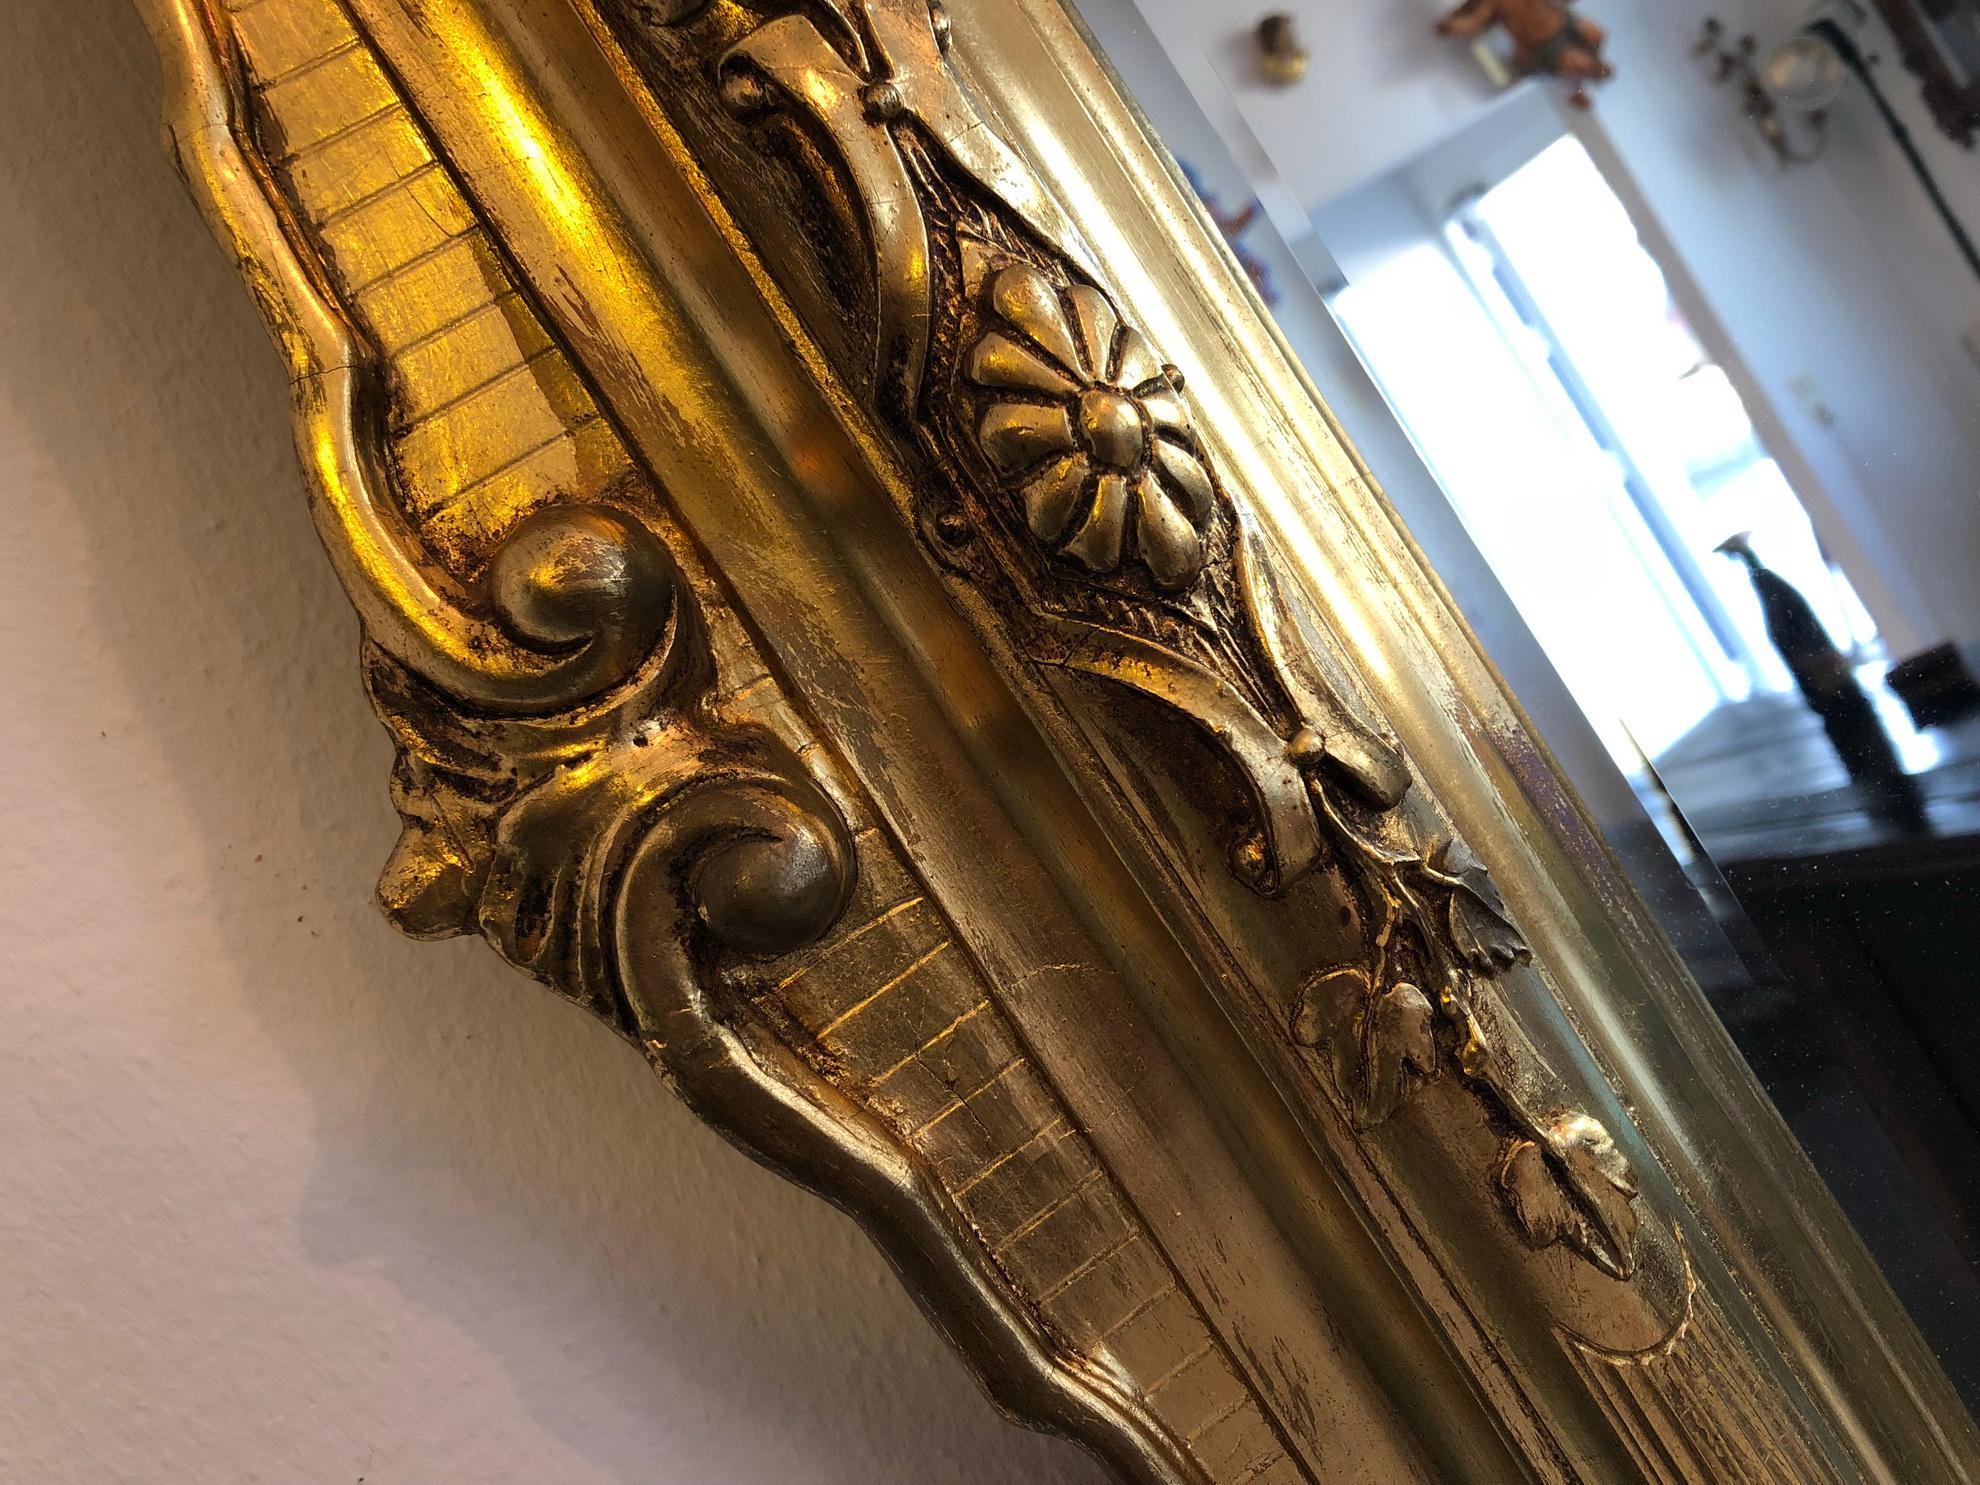 Stunning original gilded Florentine mirror with a carved wooden frame.
Decorated with floral carvings and ornamentations.
The frame is in the original gilded condition (polyment gilding) with slight abrasions
which demonstrates the uniqueness of